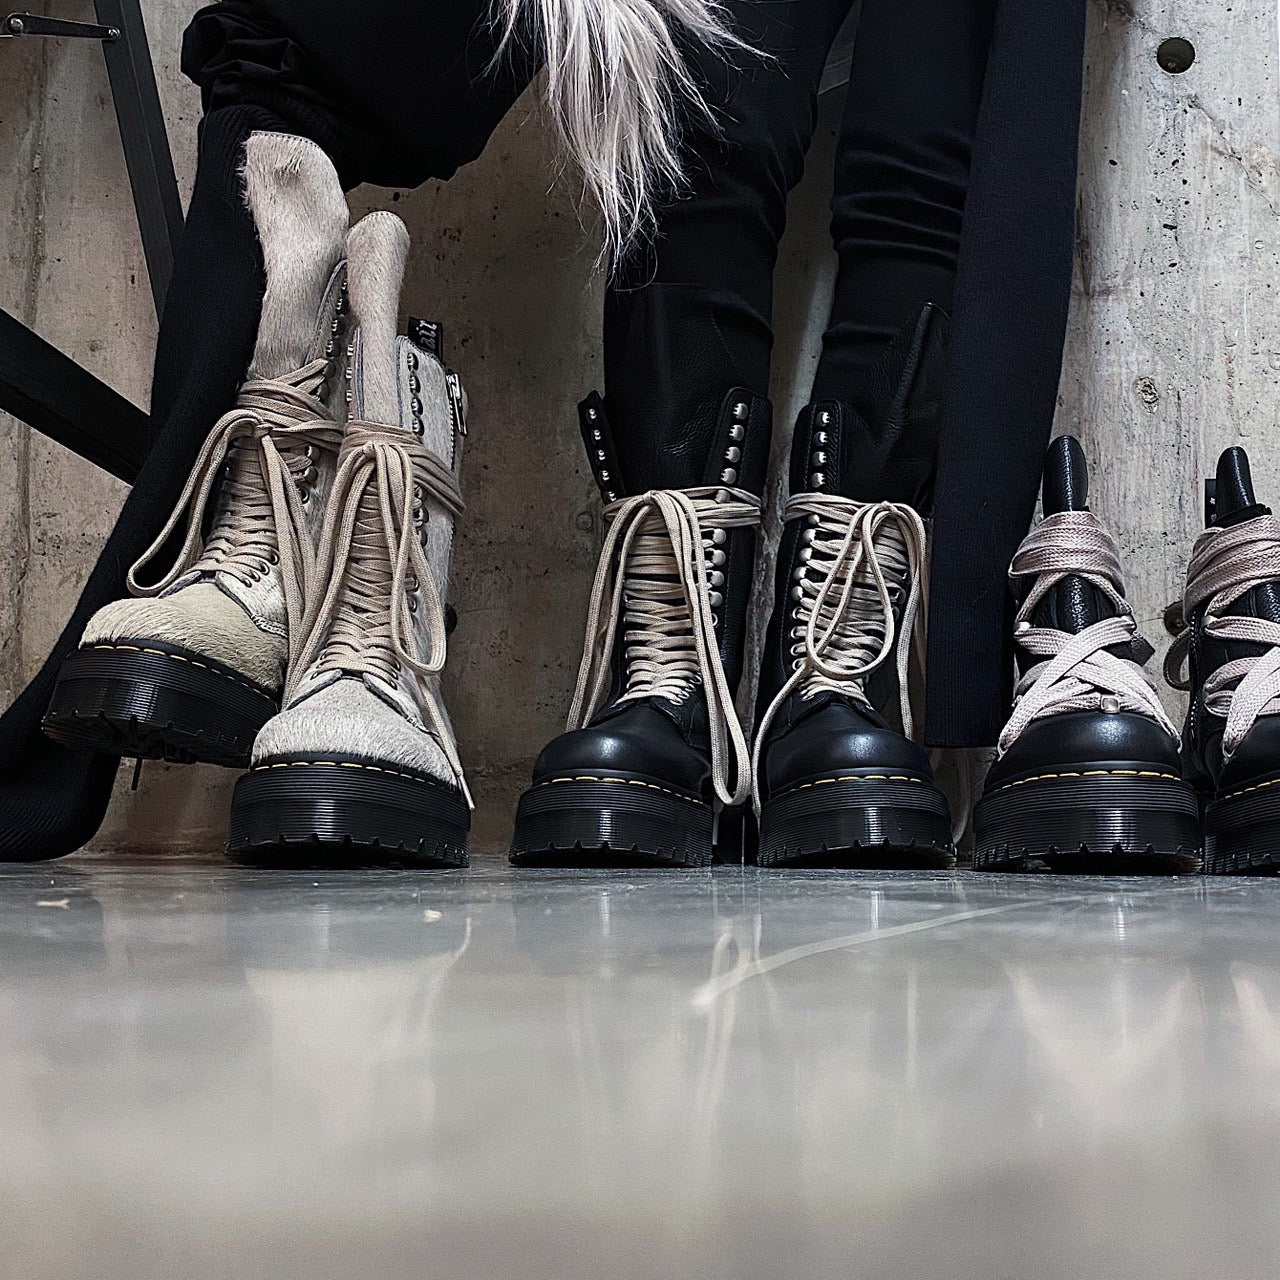 Rick Owens x Dr. Martens】 The second collaboration boots will be